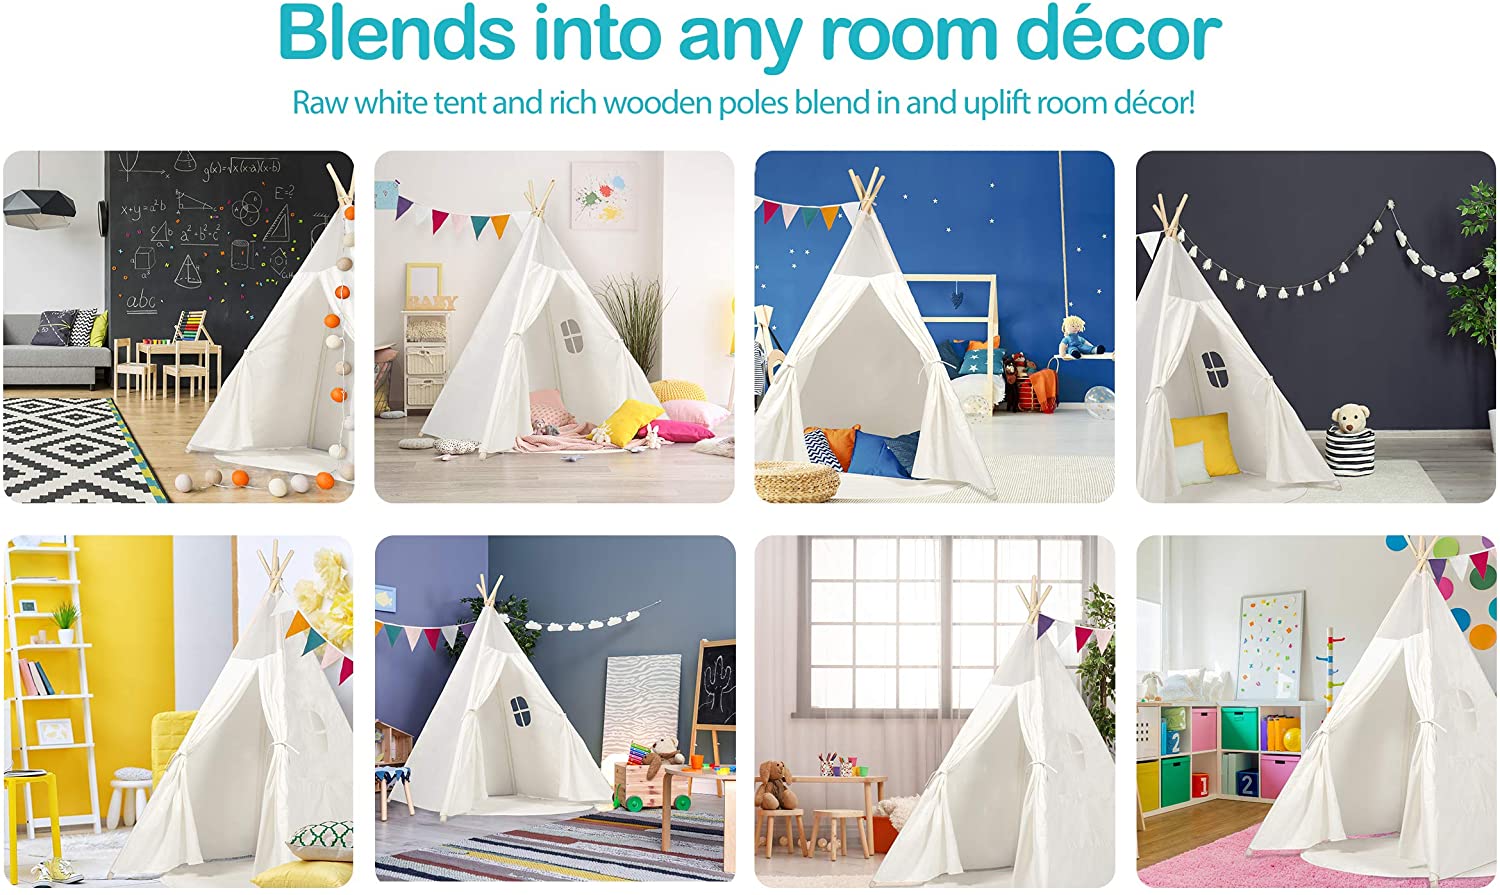 Teepee Tent for Kids - White